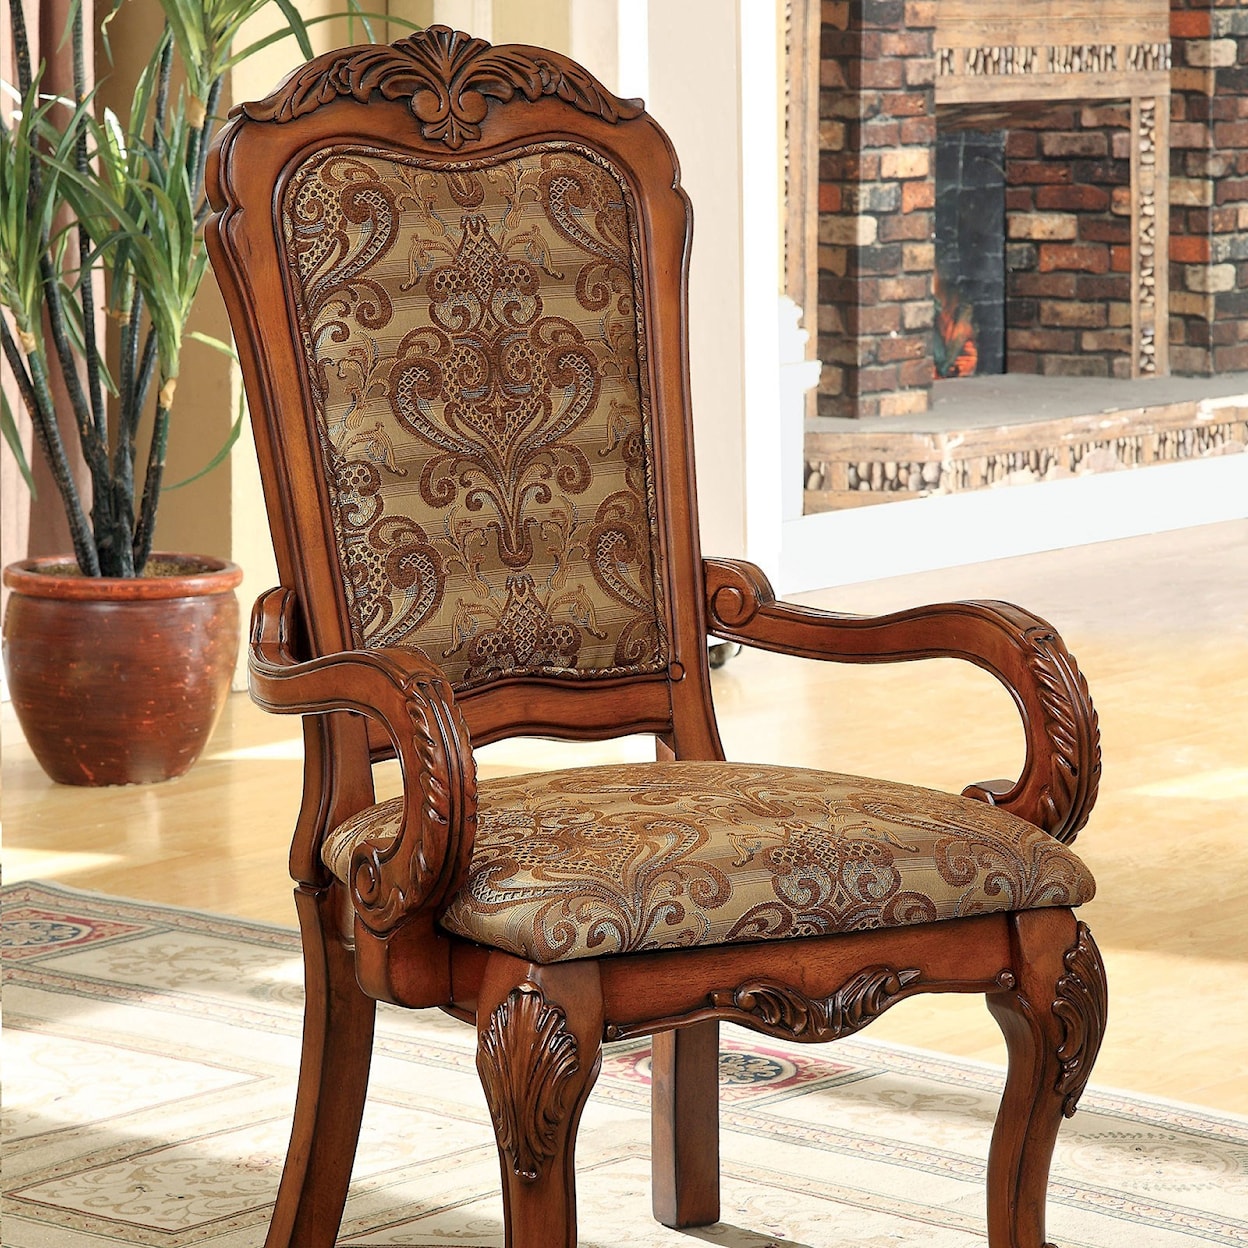 FUSA Medieve Set of Two Arm Chairs